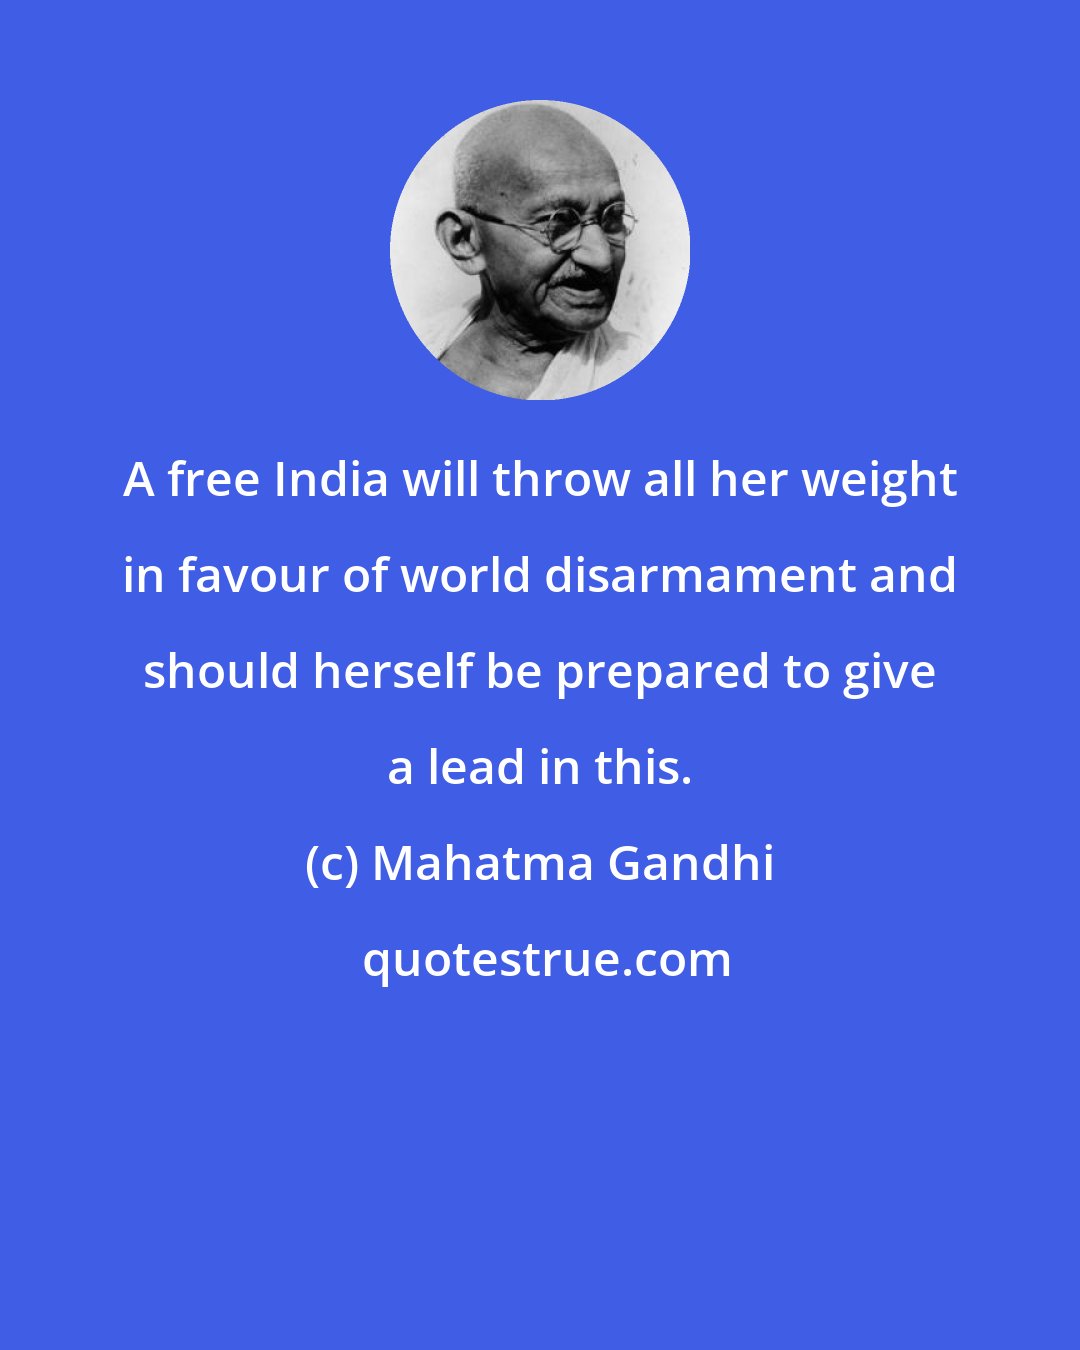 Mahatma Gandhi: A free India will throw all her weight in favour of world disarmament and should herself be prepared to give a lead in this.